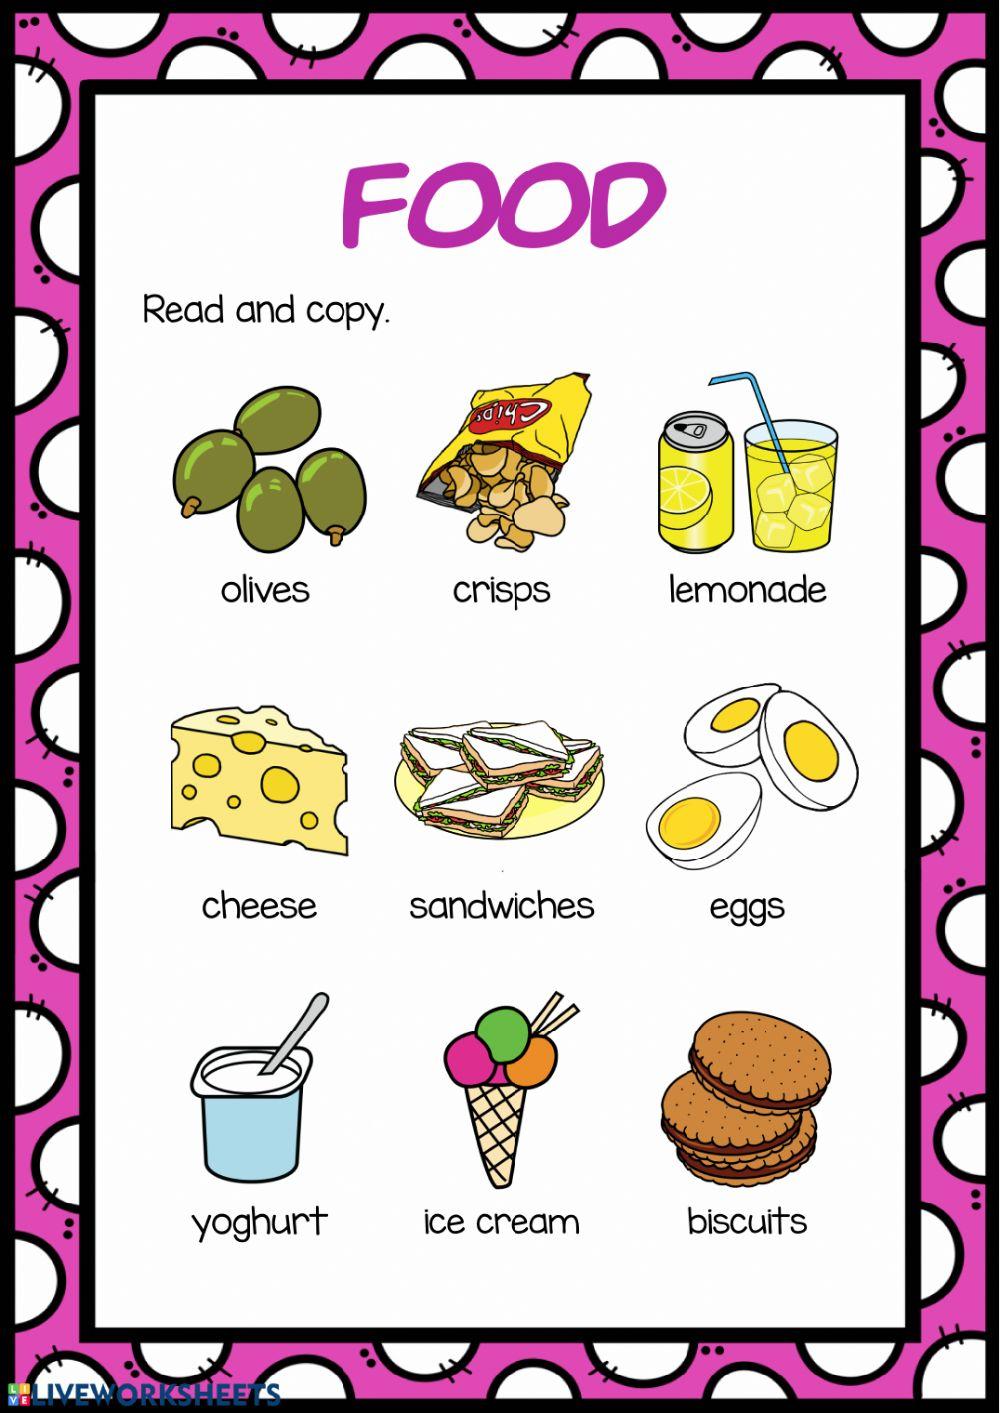 Food 1.2. Read and copy